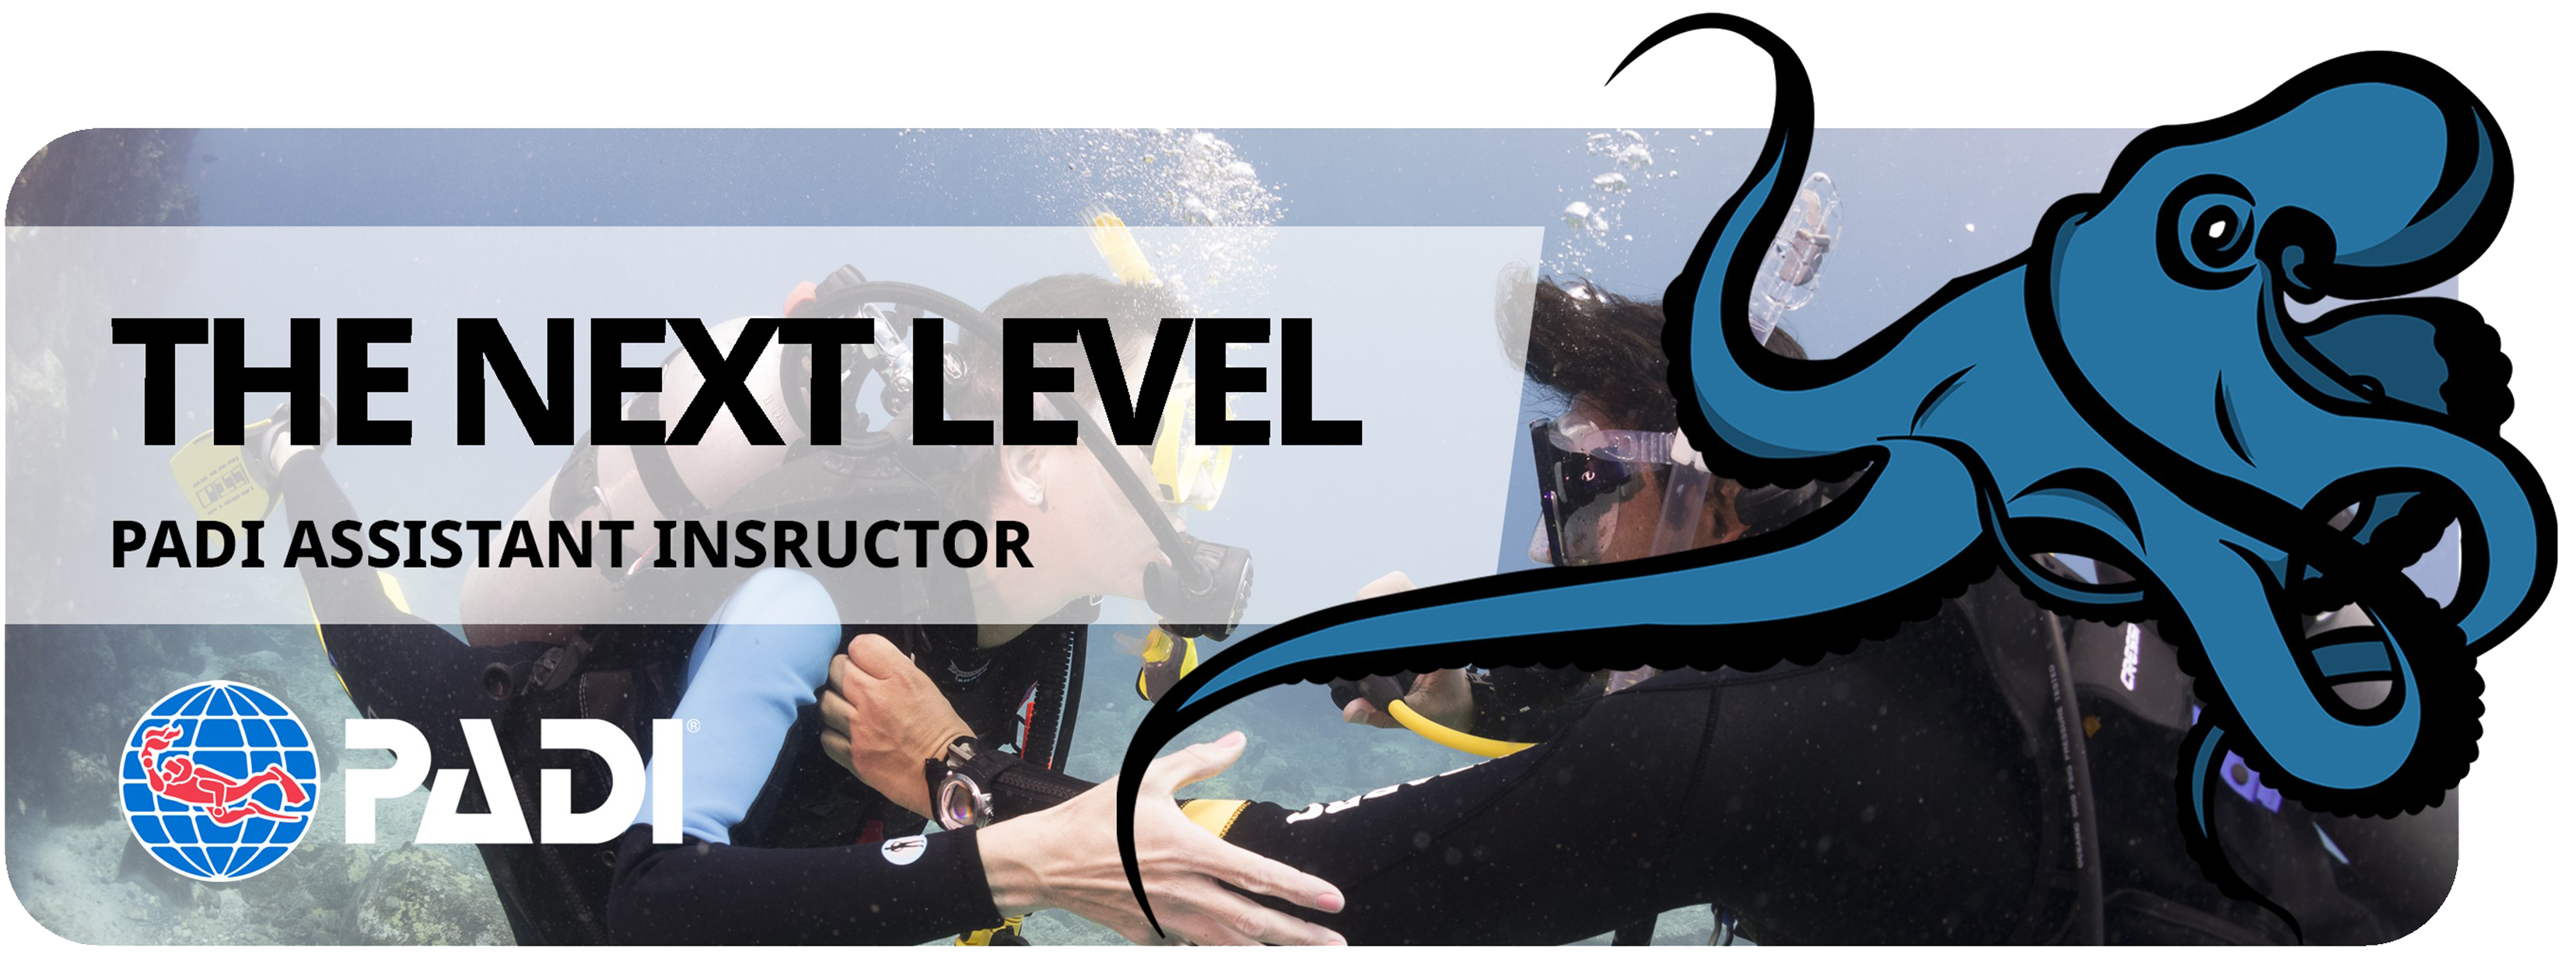 PADI Assistant Instructor banner